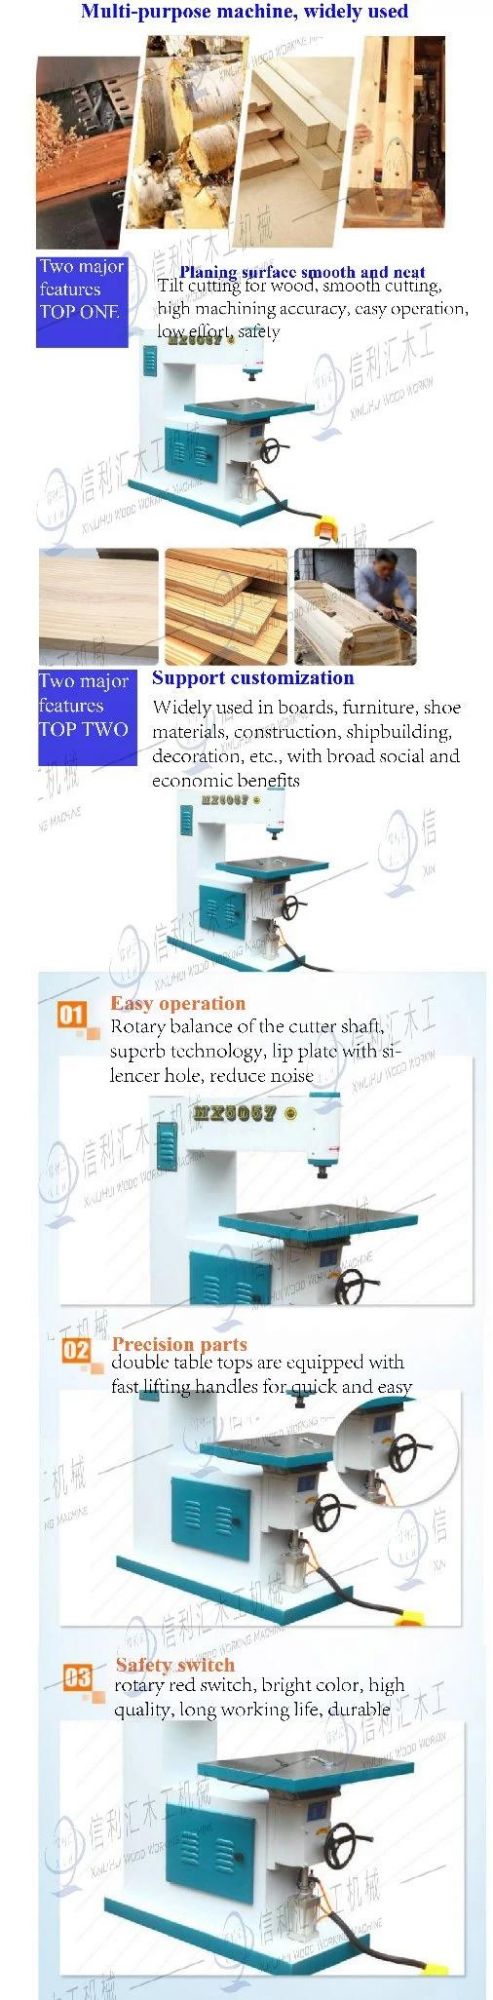 Upright Pin Router, Floor Model Upright Router, CNC Router Upright, Over Arm Router, Over Arm Pin Router Machine Made in China, Good Price